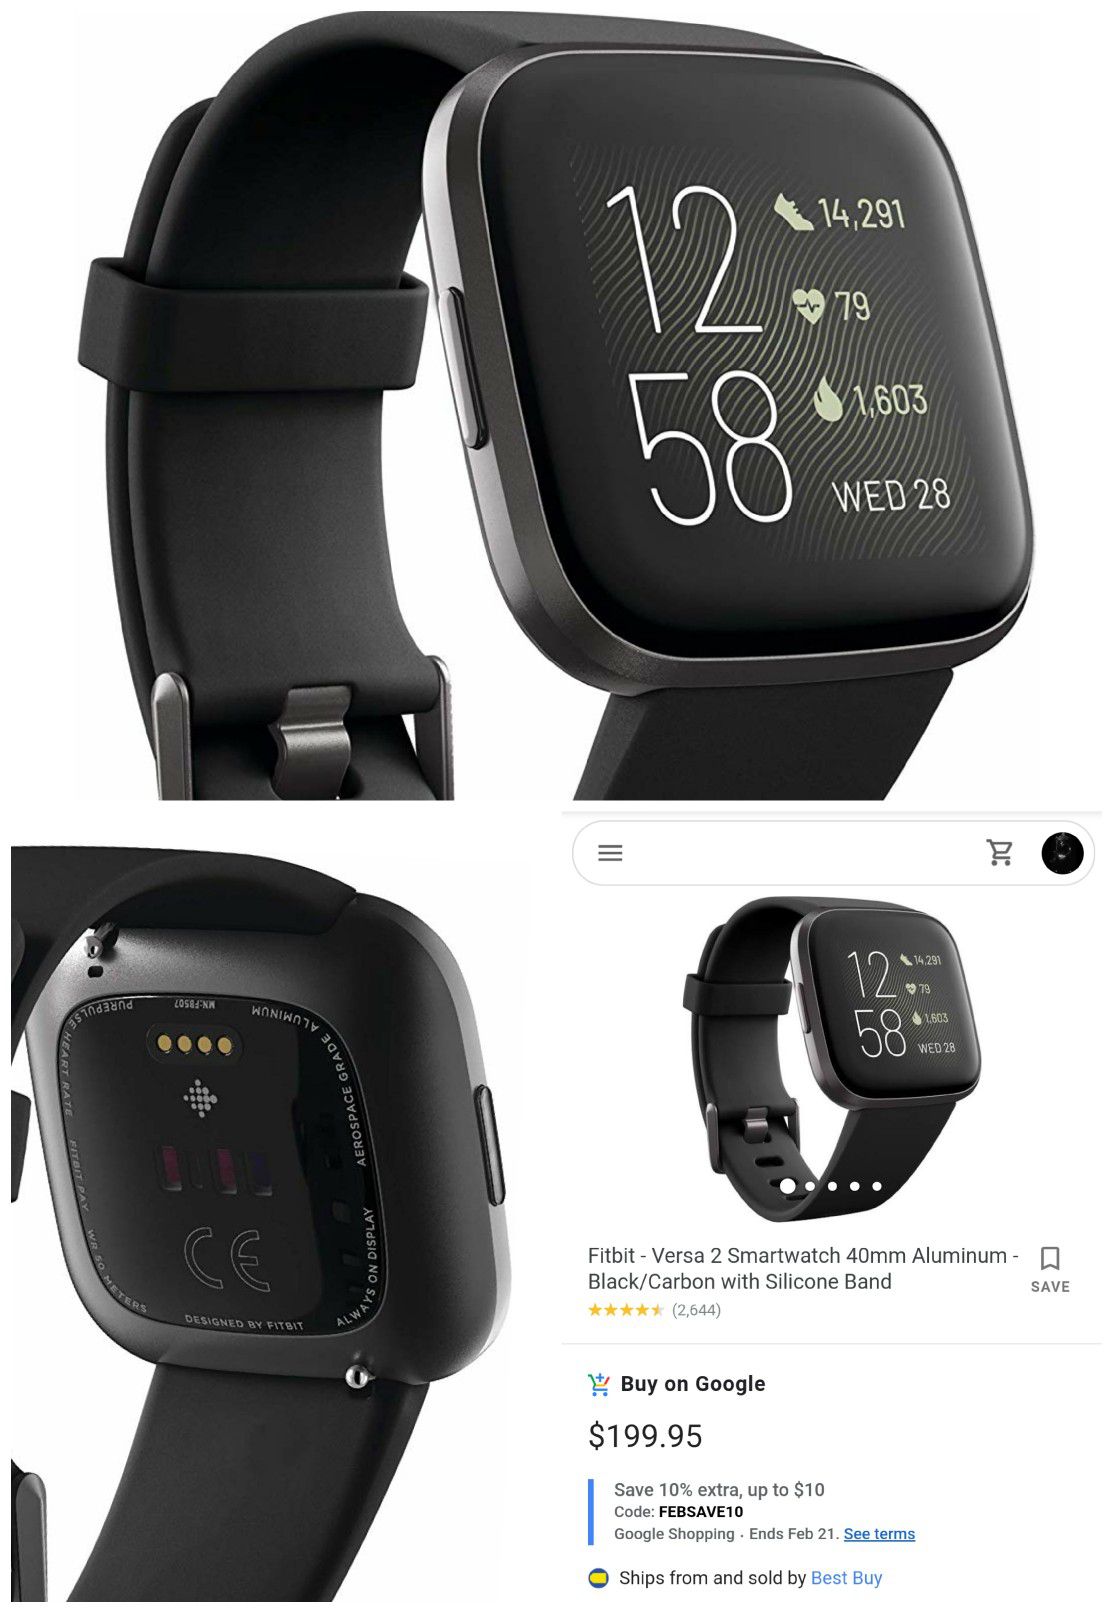 Fitbit Versa 2 Health & Fitness Smartwatch with Heart Rate, Music, Alexa Built-in, Sleep & Swim Tracking, Black/Carbon